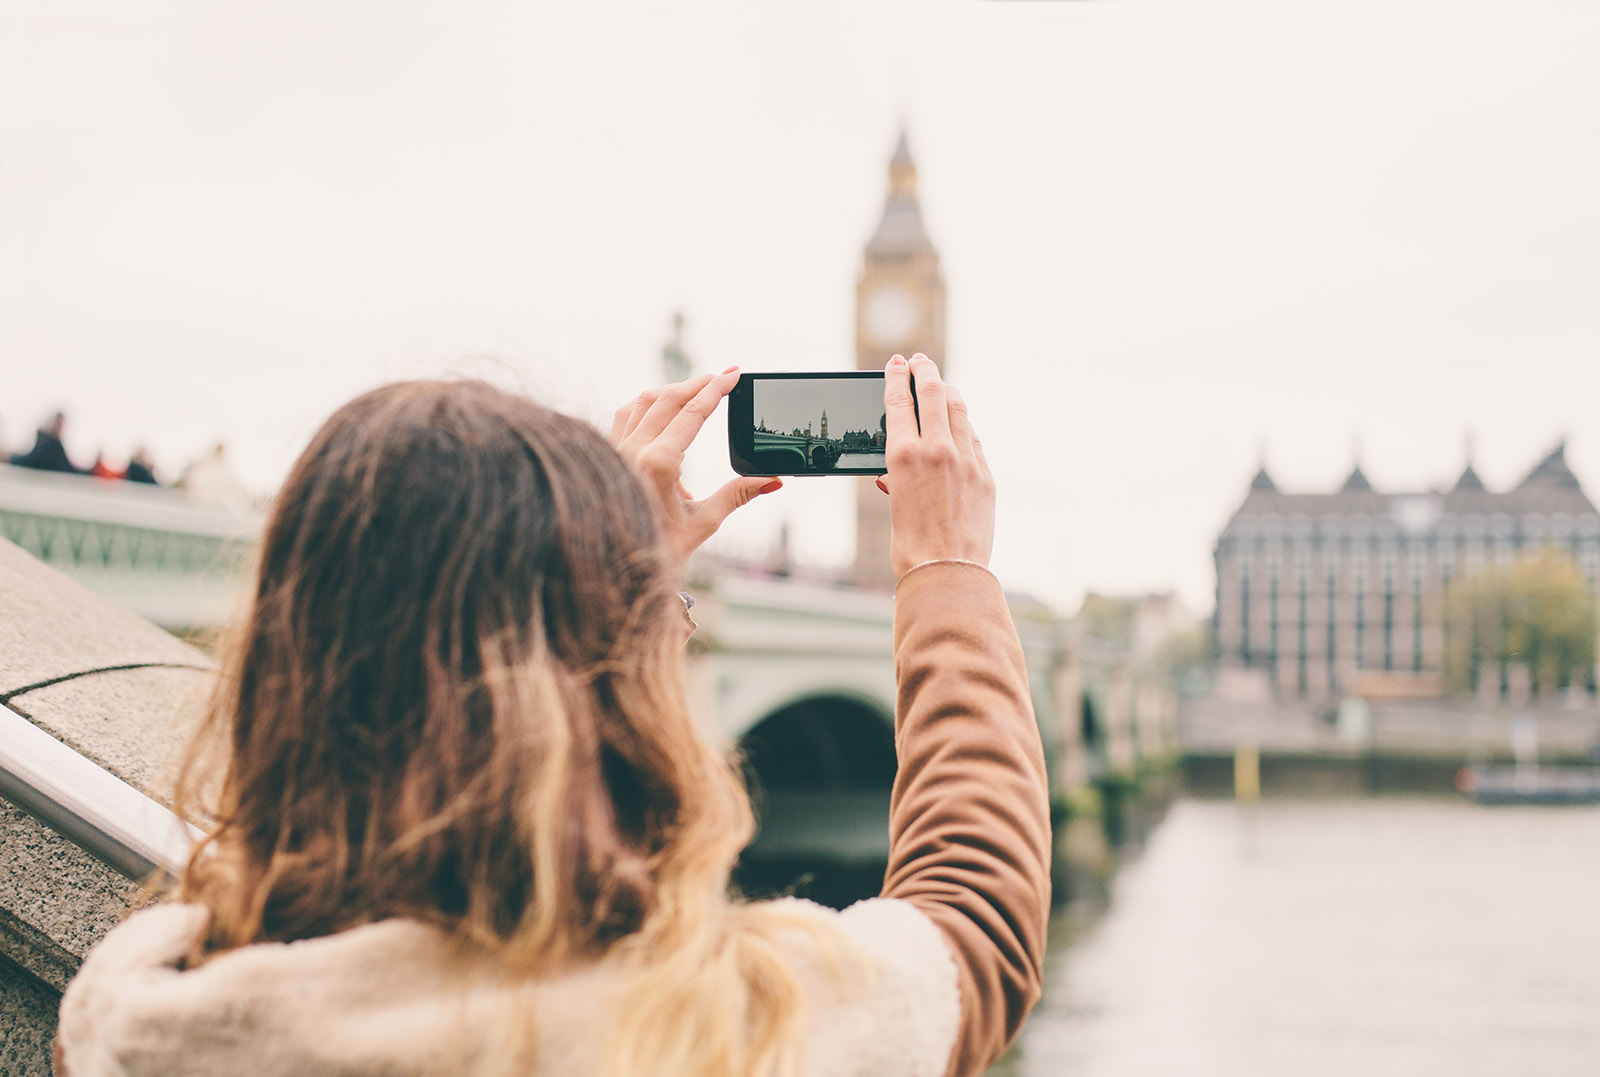 Create albums on your phone when travelling - Girl holding up mobile phone taking photograph of sites while travelling | BNE Traveller Tips: What to do with your holiday photographs